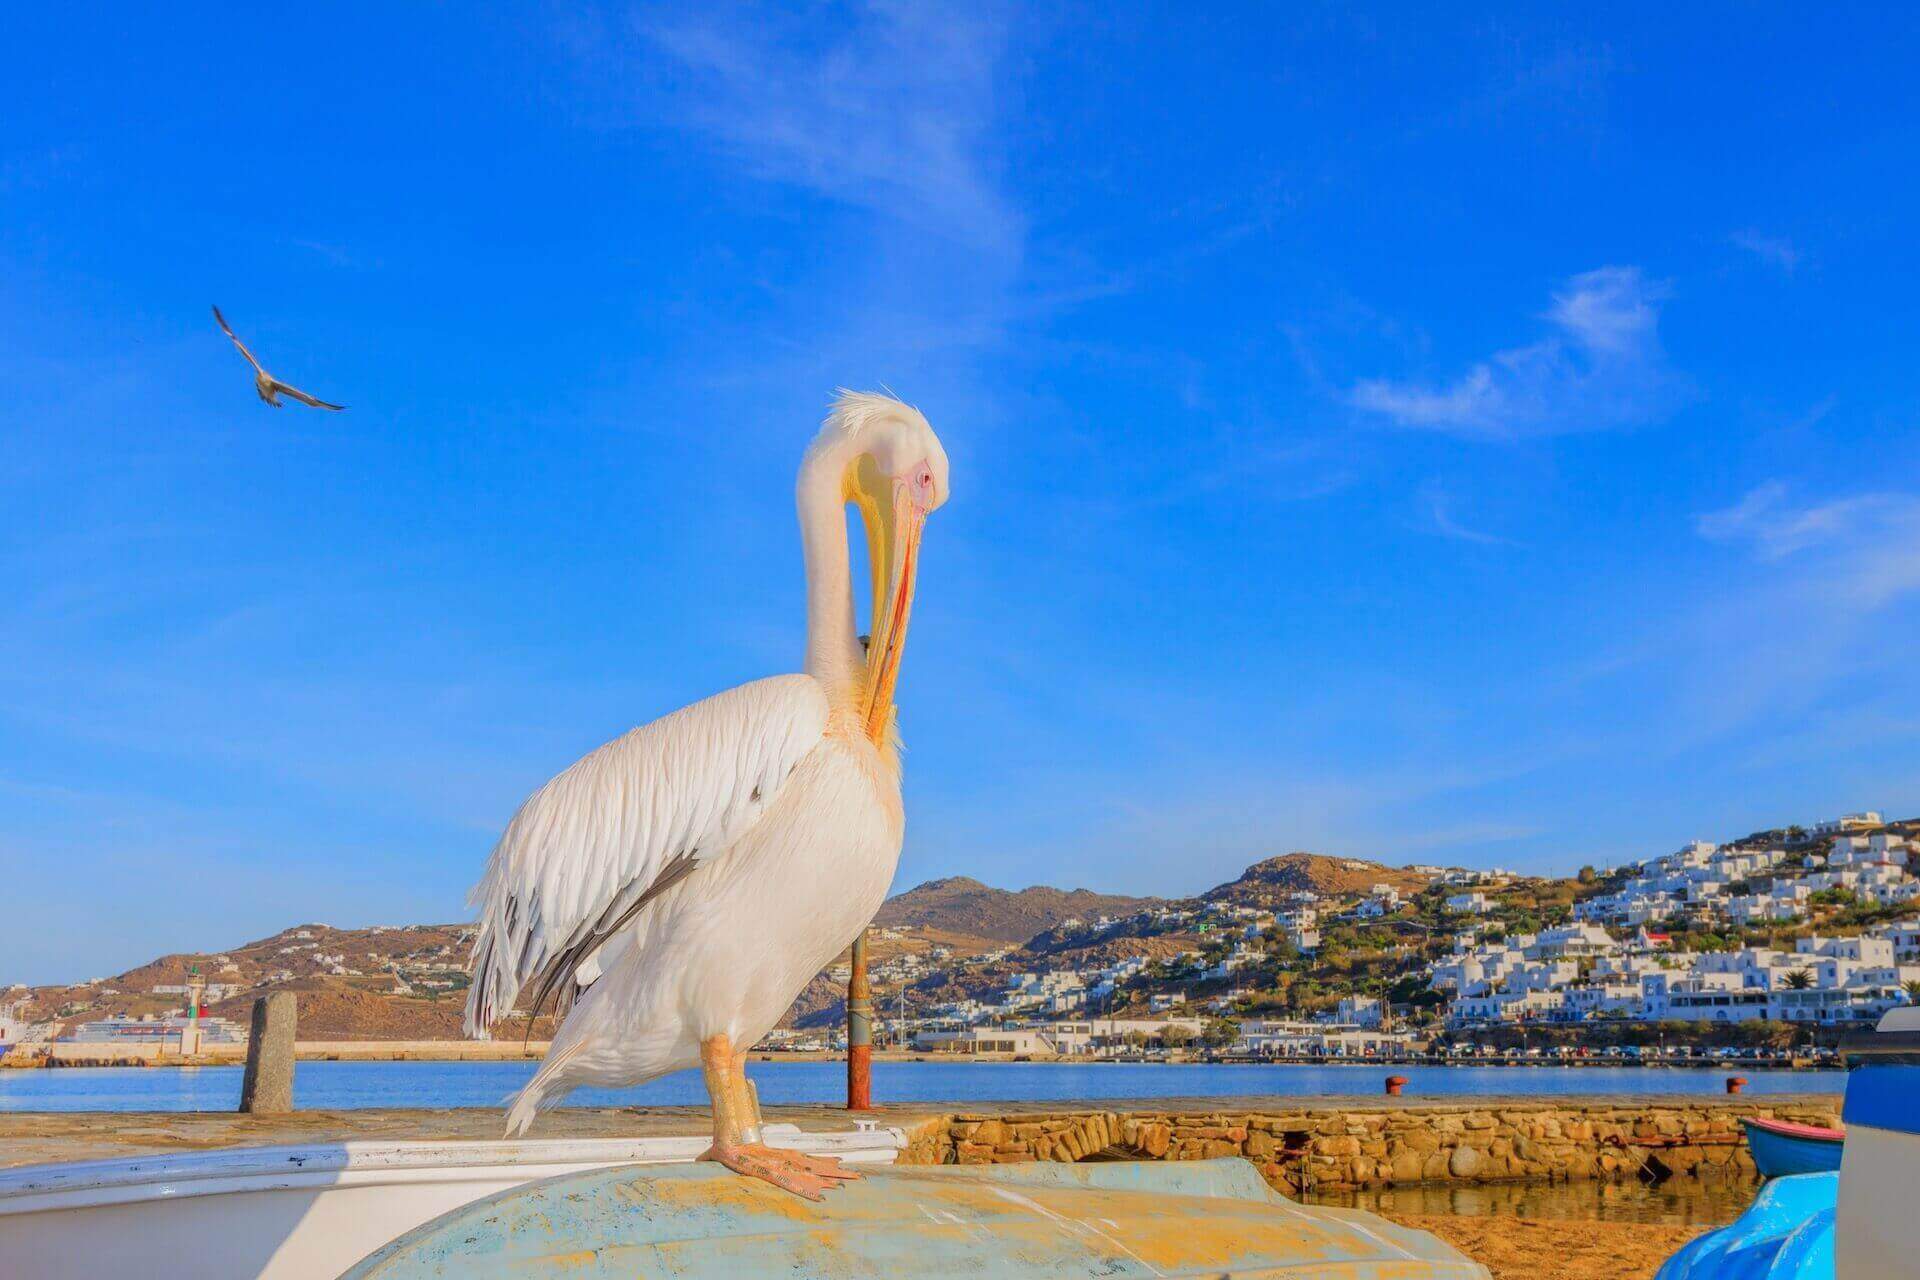 Pelican besides the sea